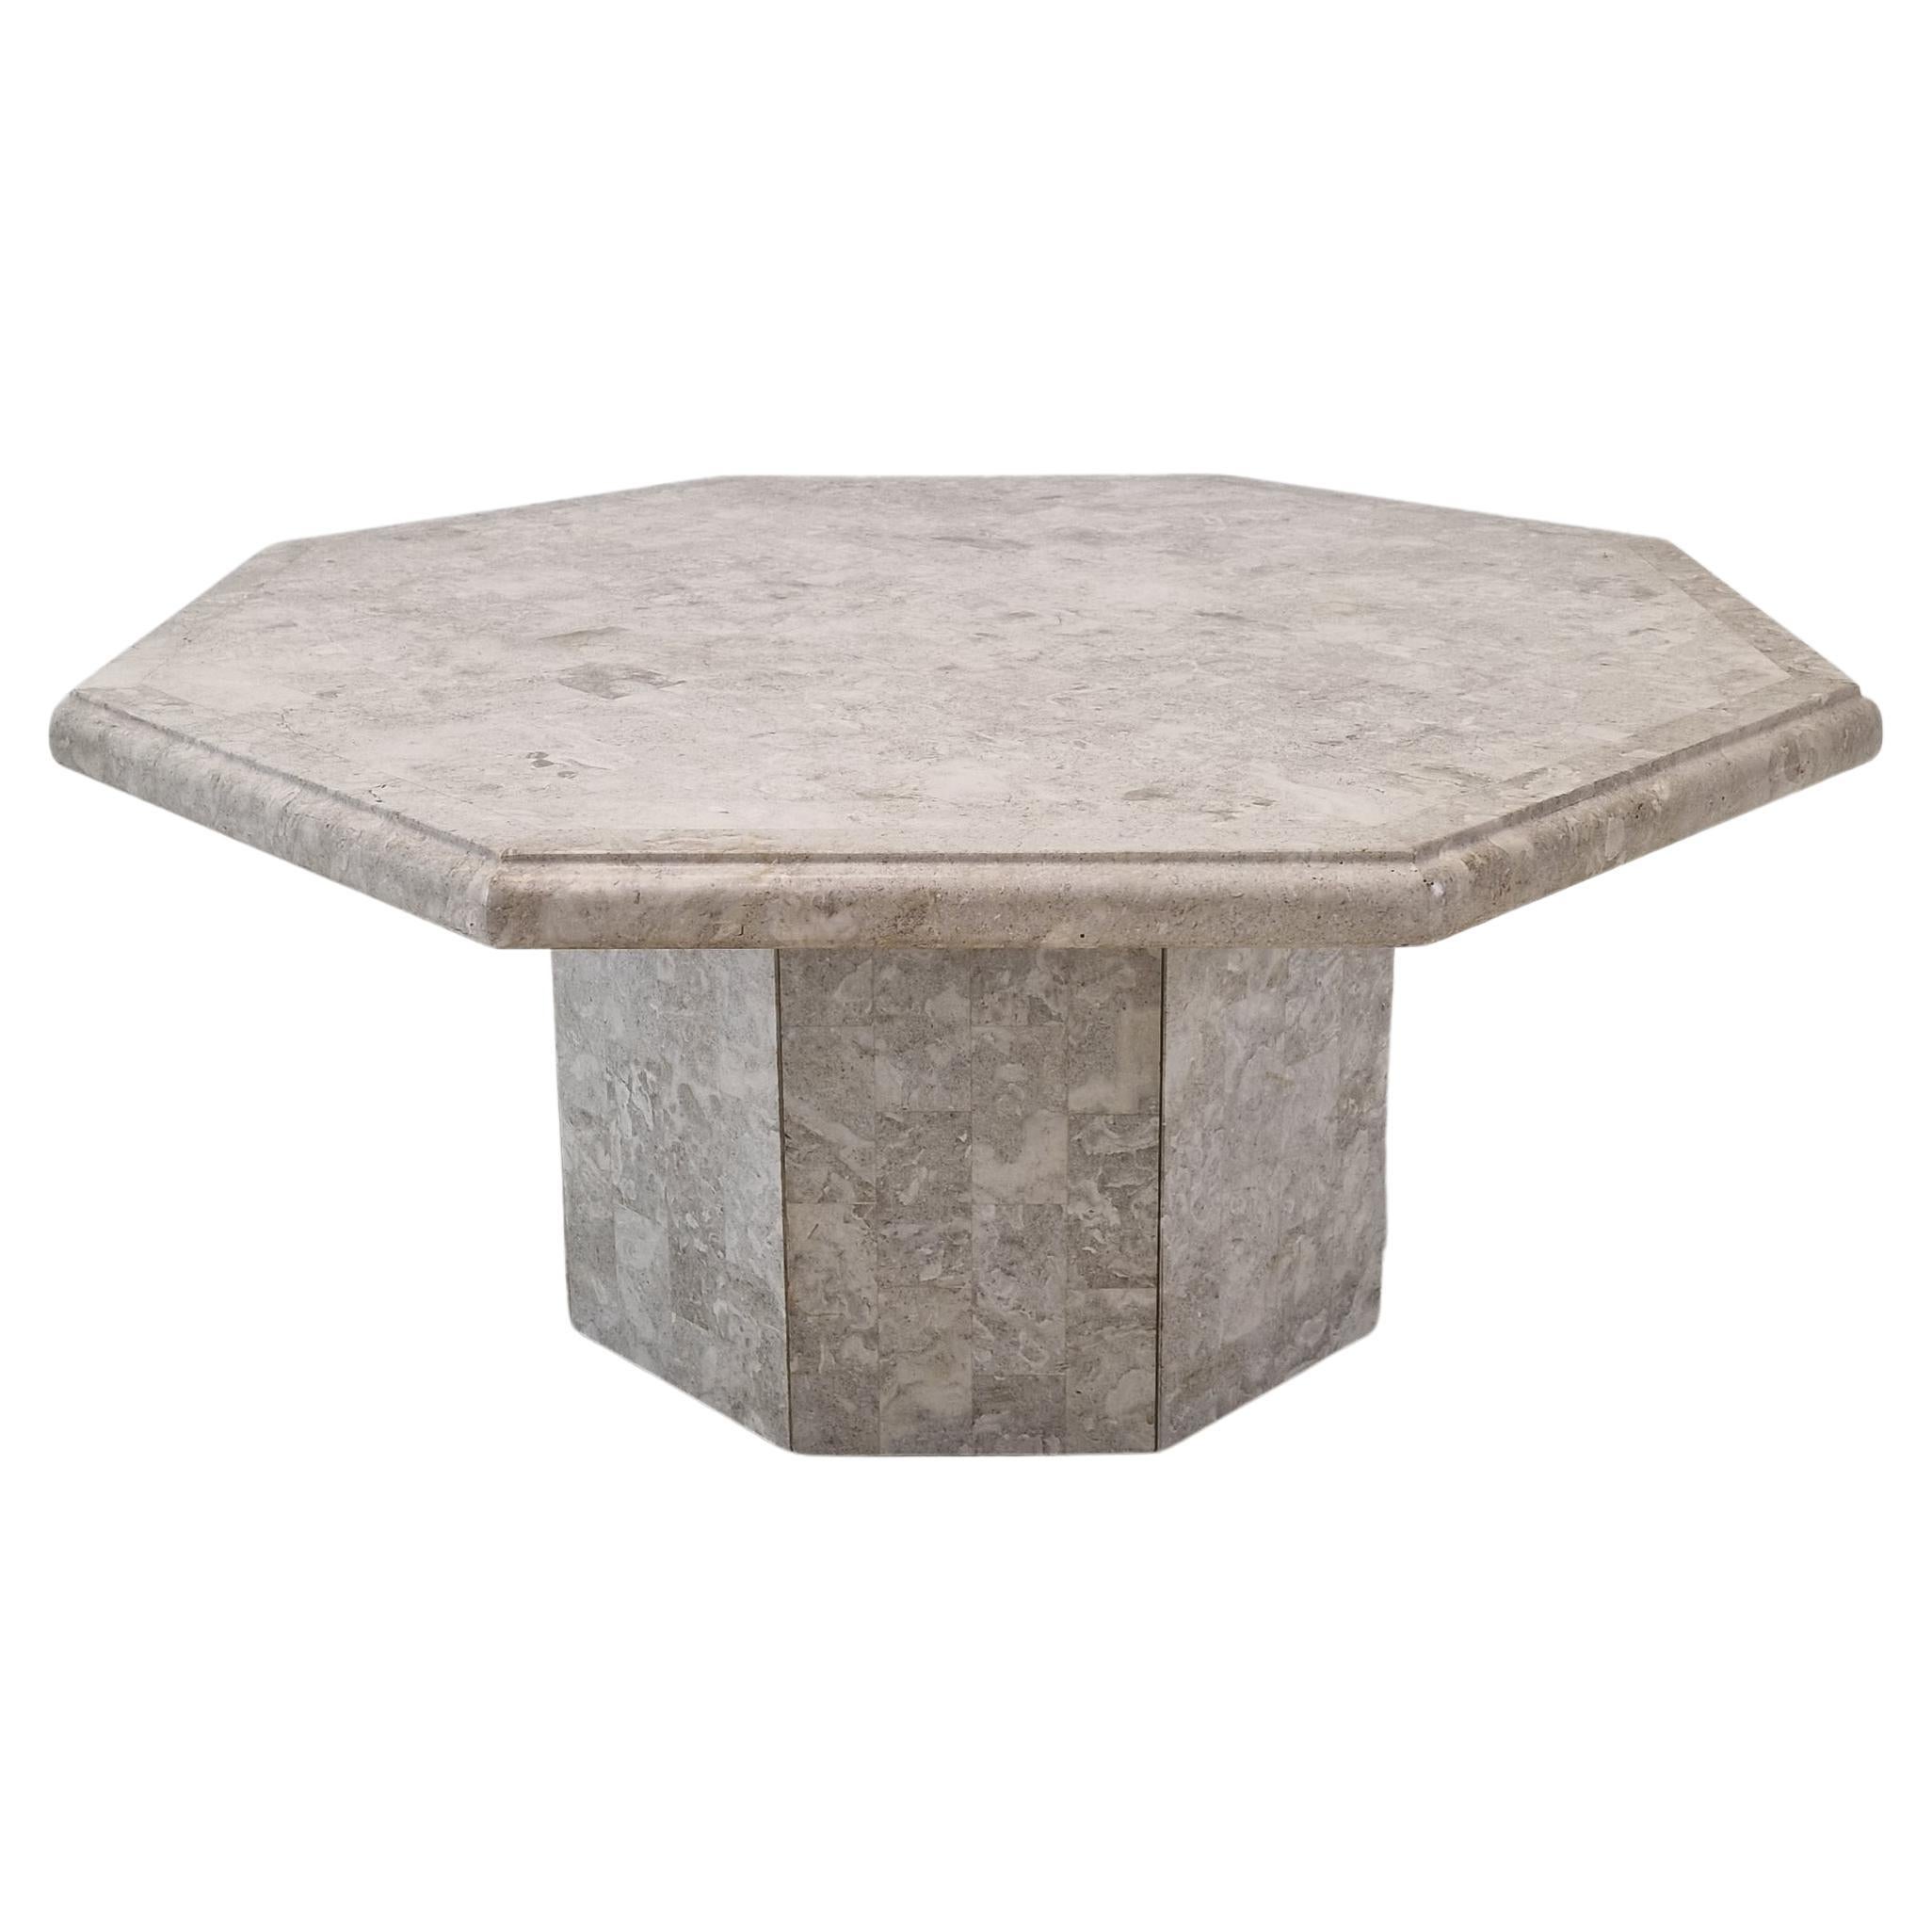 Mactan Octagon Stone or Fossil Stone Coffee Table, 1980s For Sale